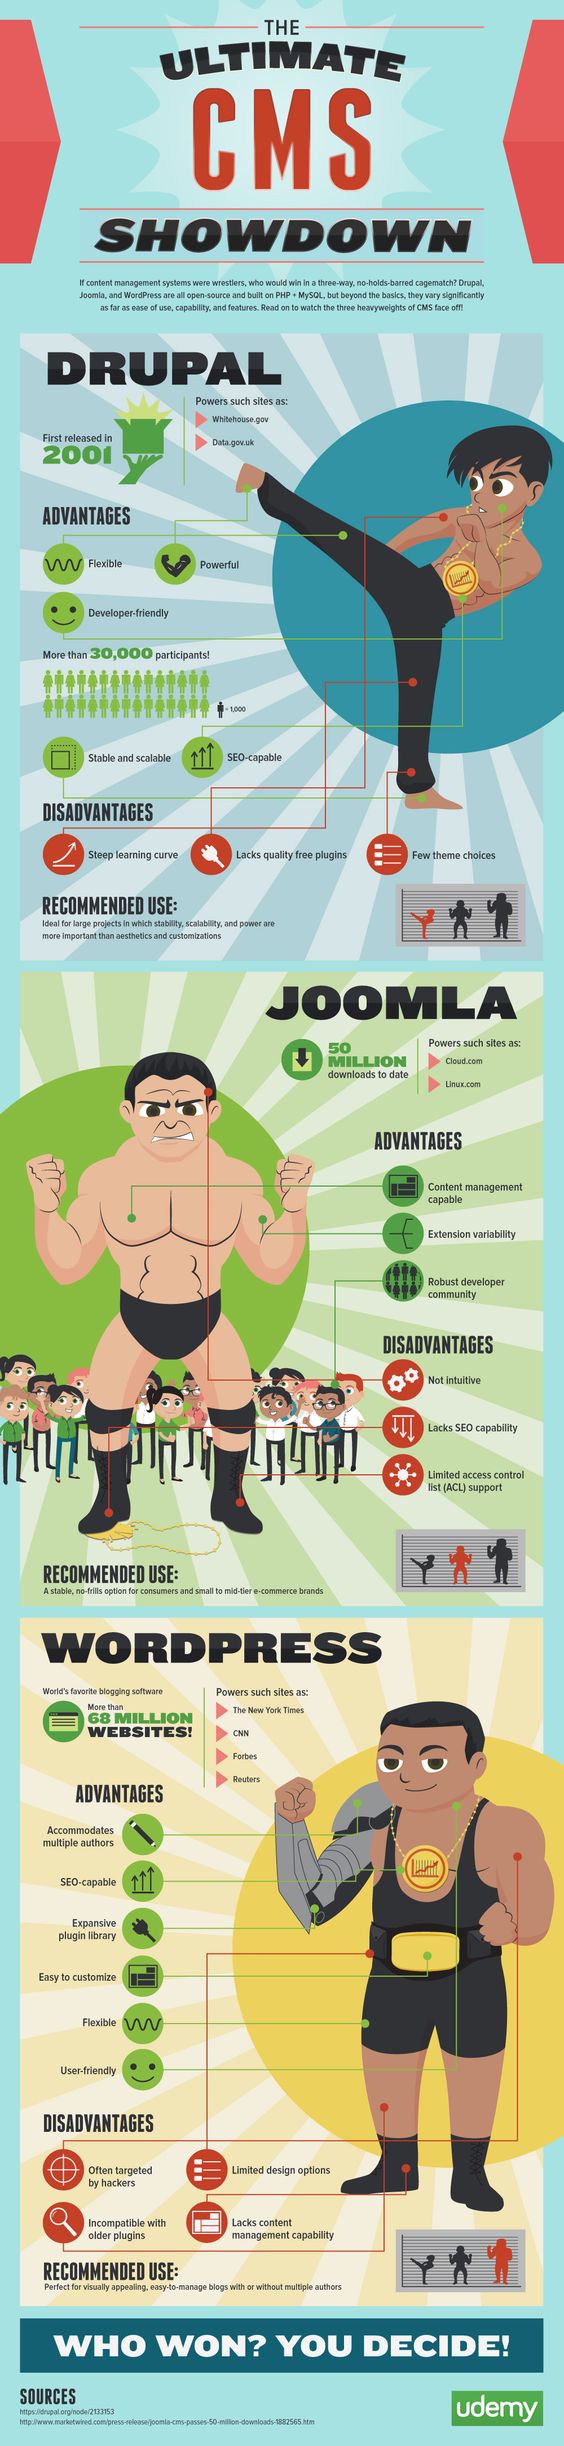 A pretty fair look at pros and cons of Drupal, Joomla and WordPress #Drupal #Joomla #WordPress What's your take?